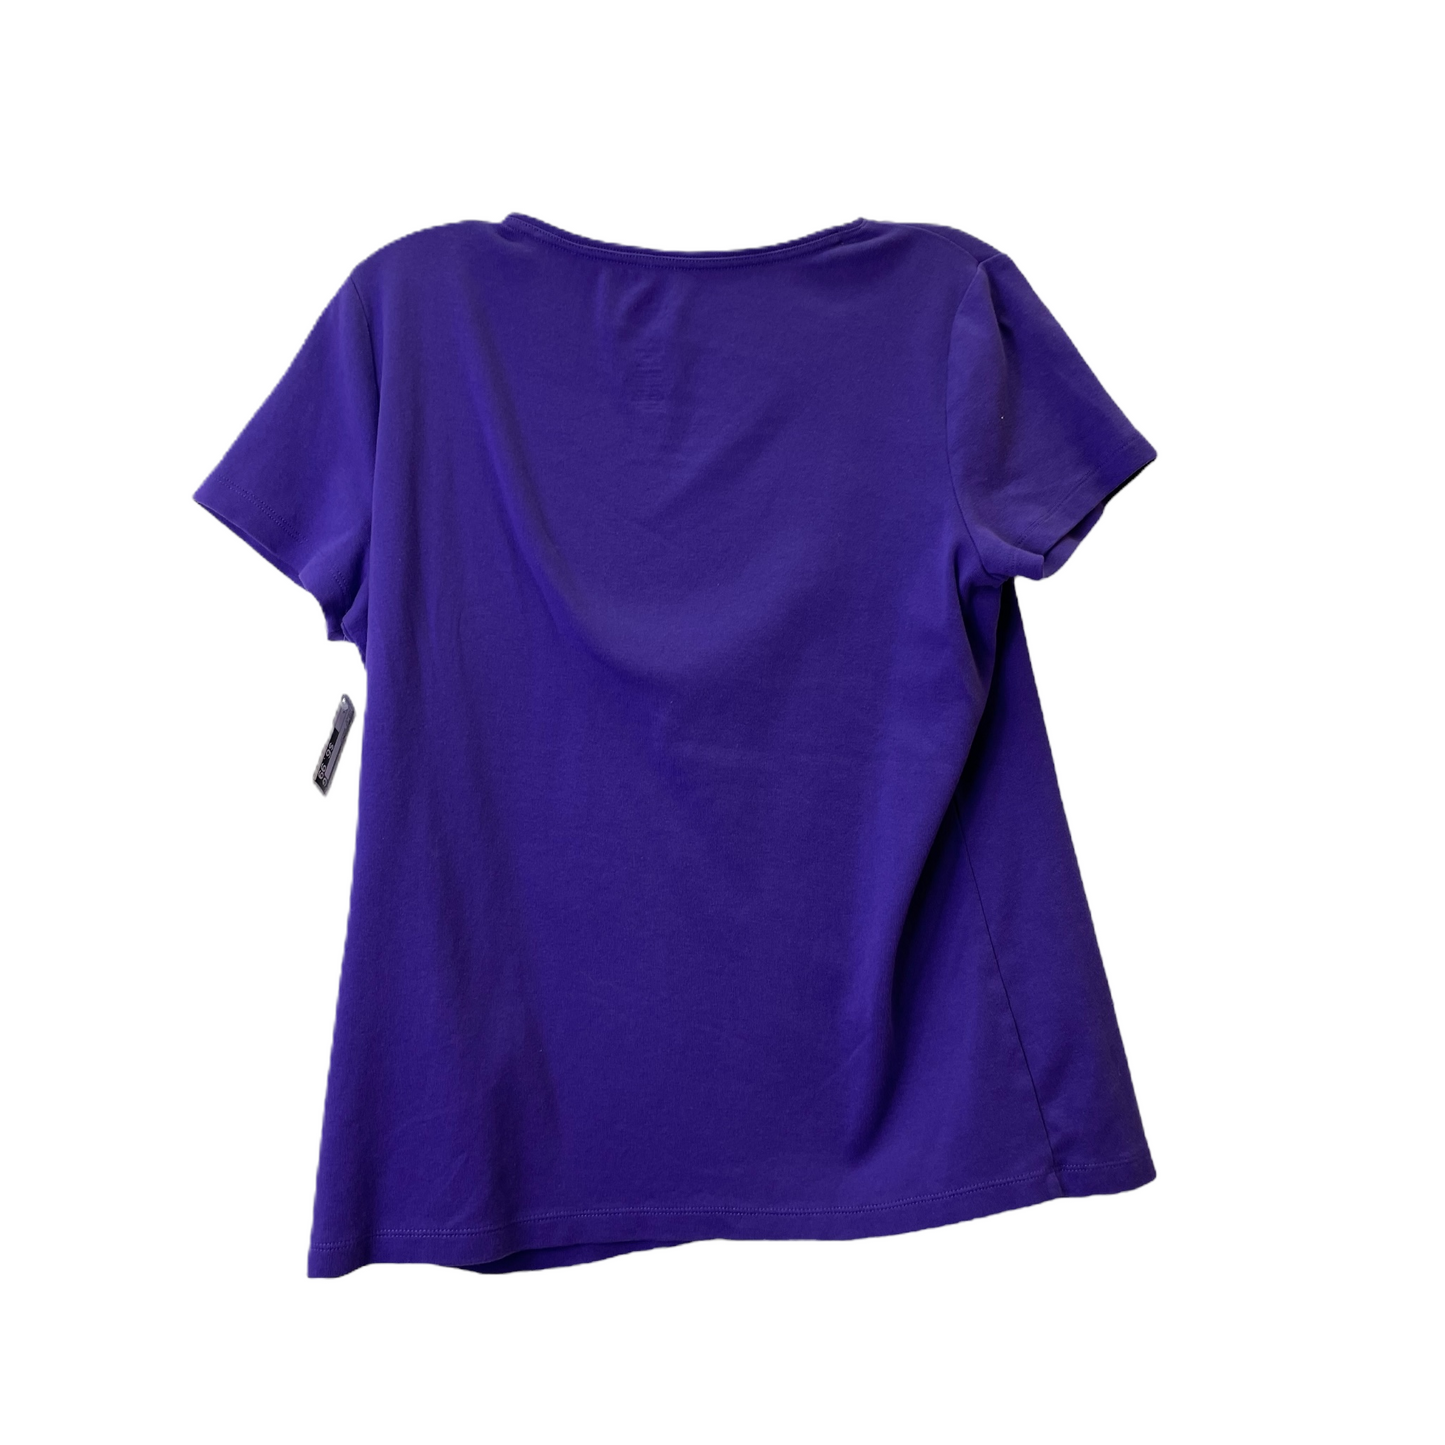 Purple Top Short Sleeve Basic By St Johns Bay, Size: L